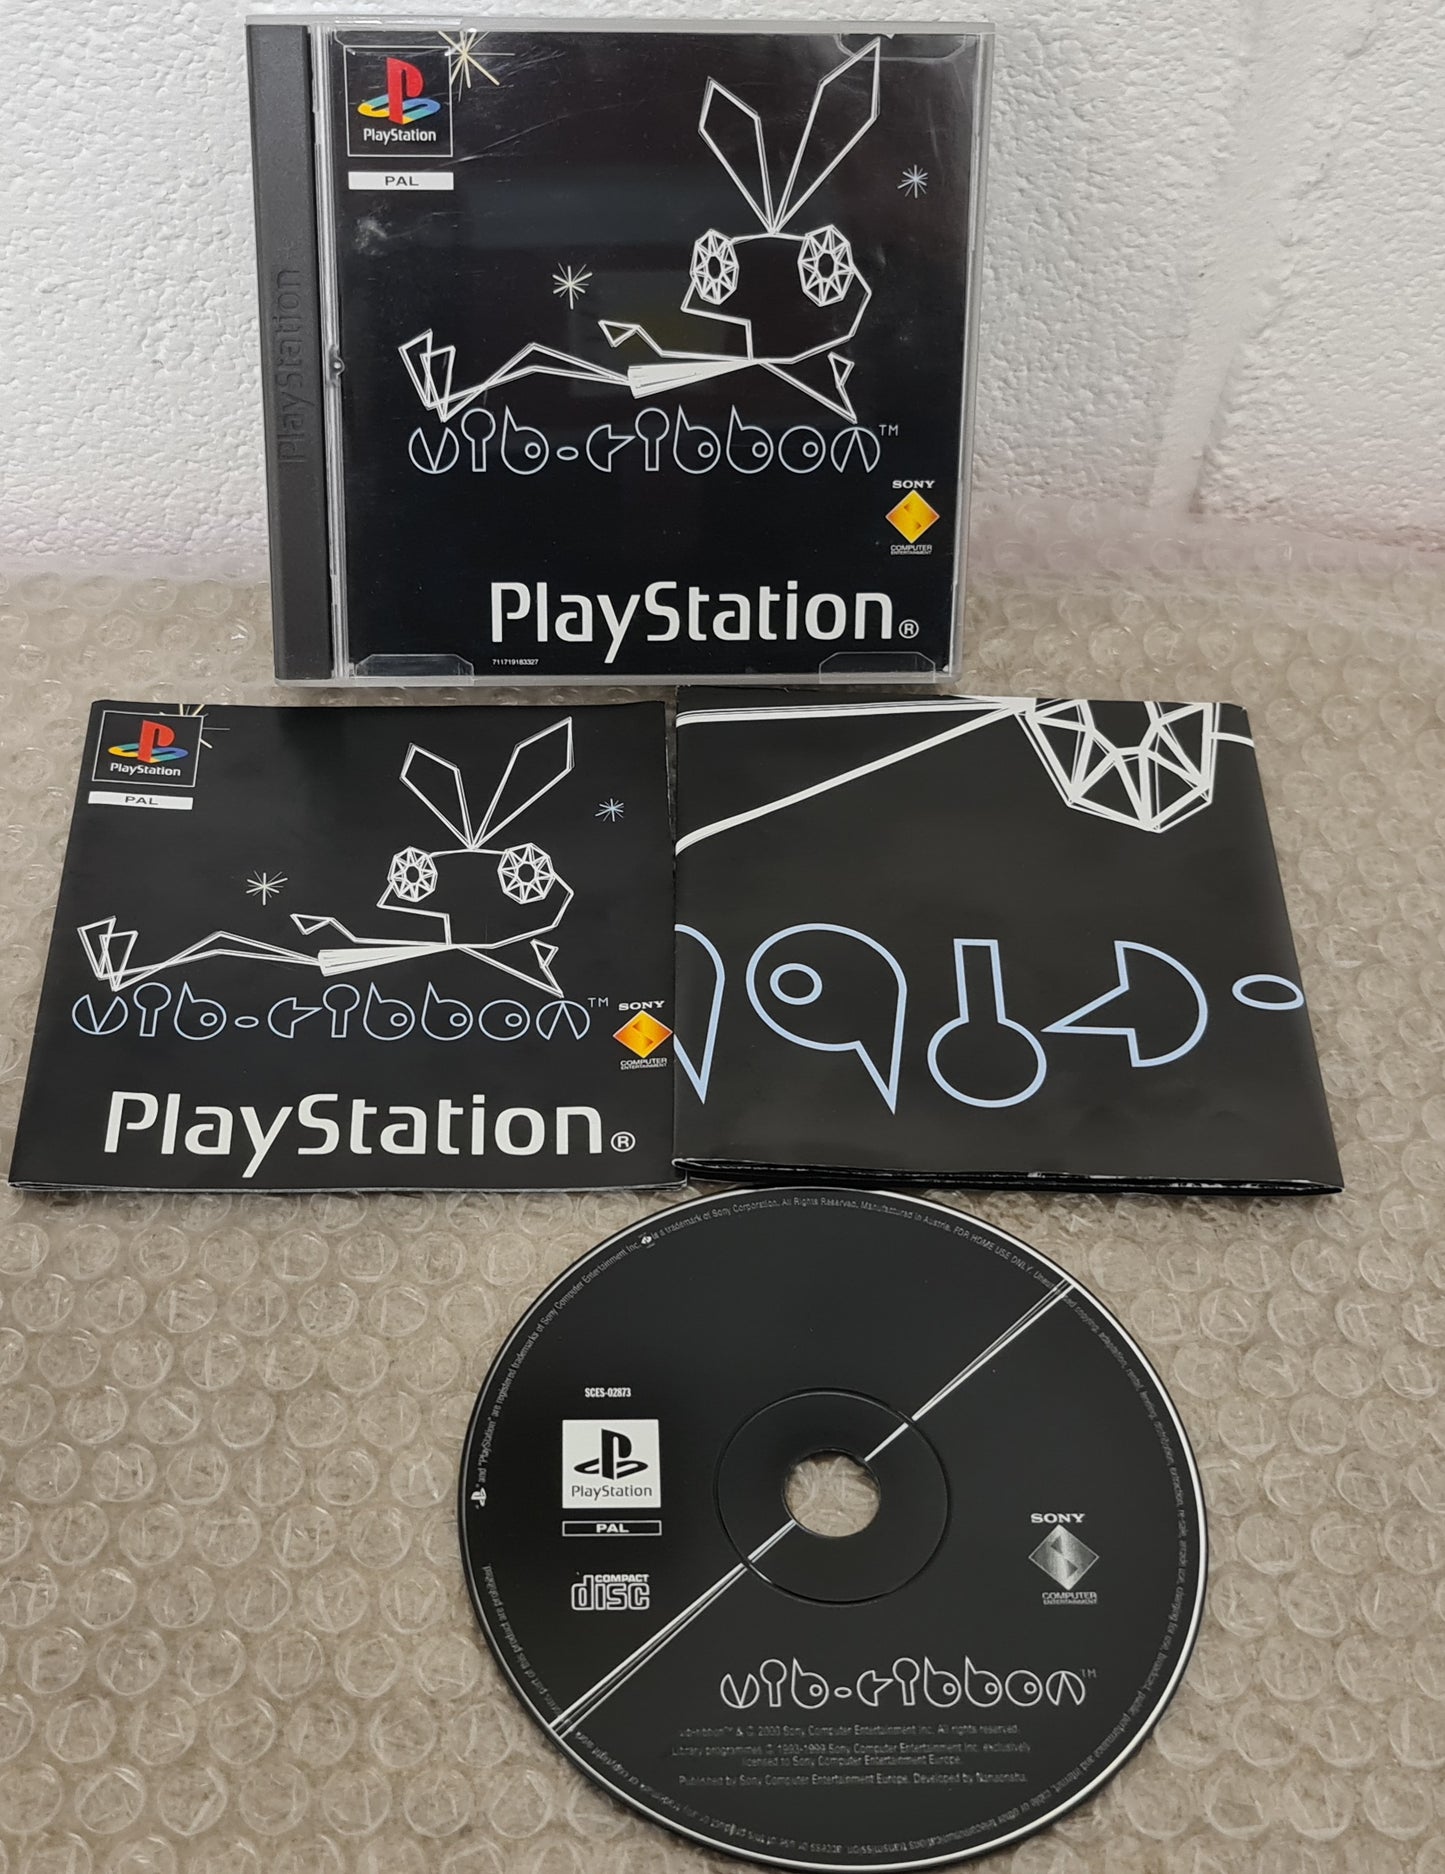 Vib-Ribbon Complete with Poster Sony Playstation 1 (PS1) RARE Game